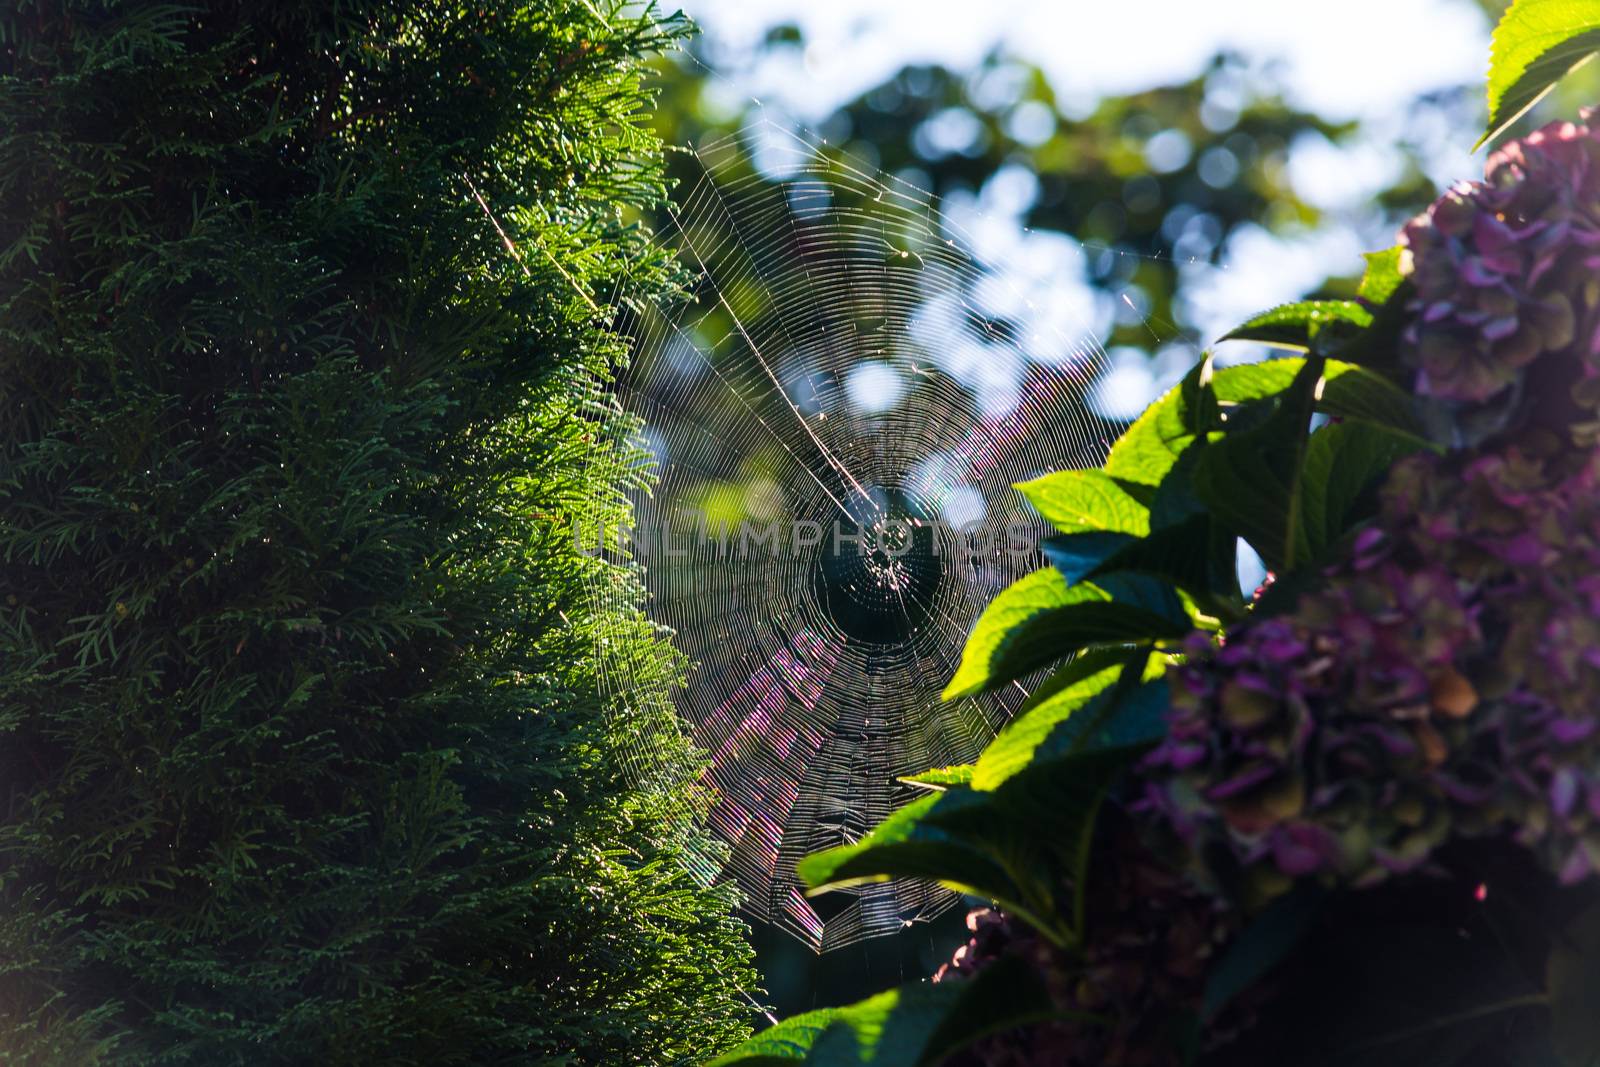 The spider's web or cobweb close up with colorful background.